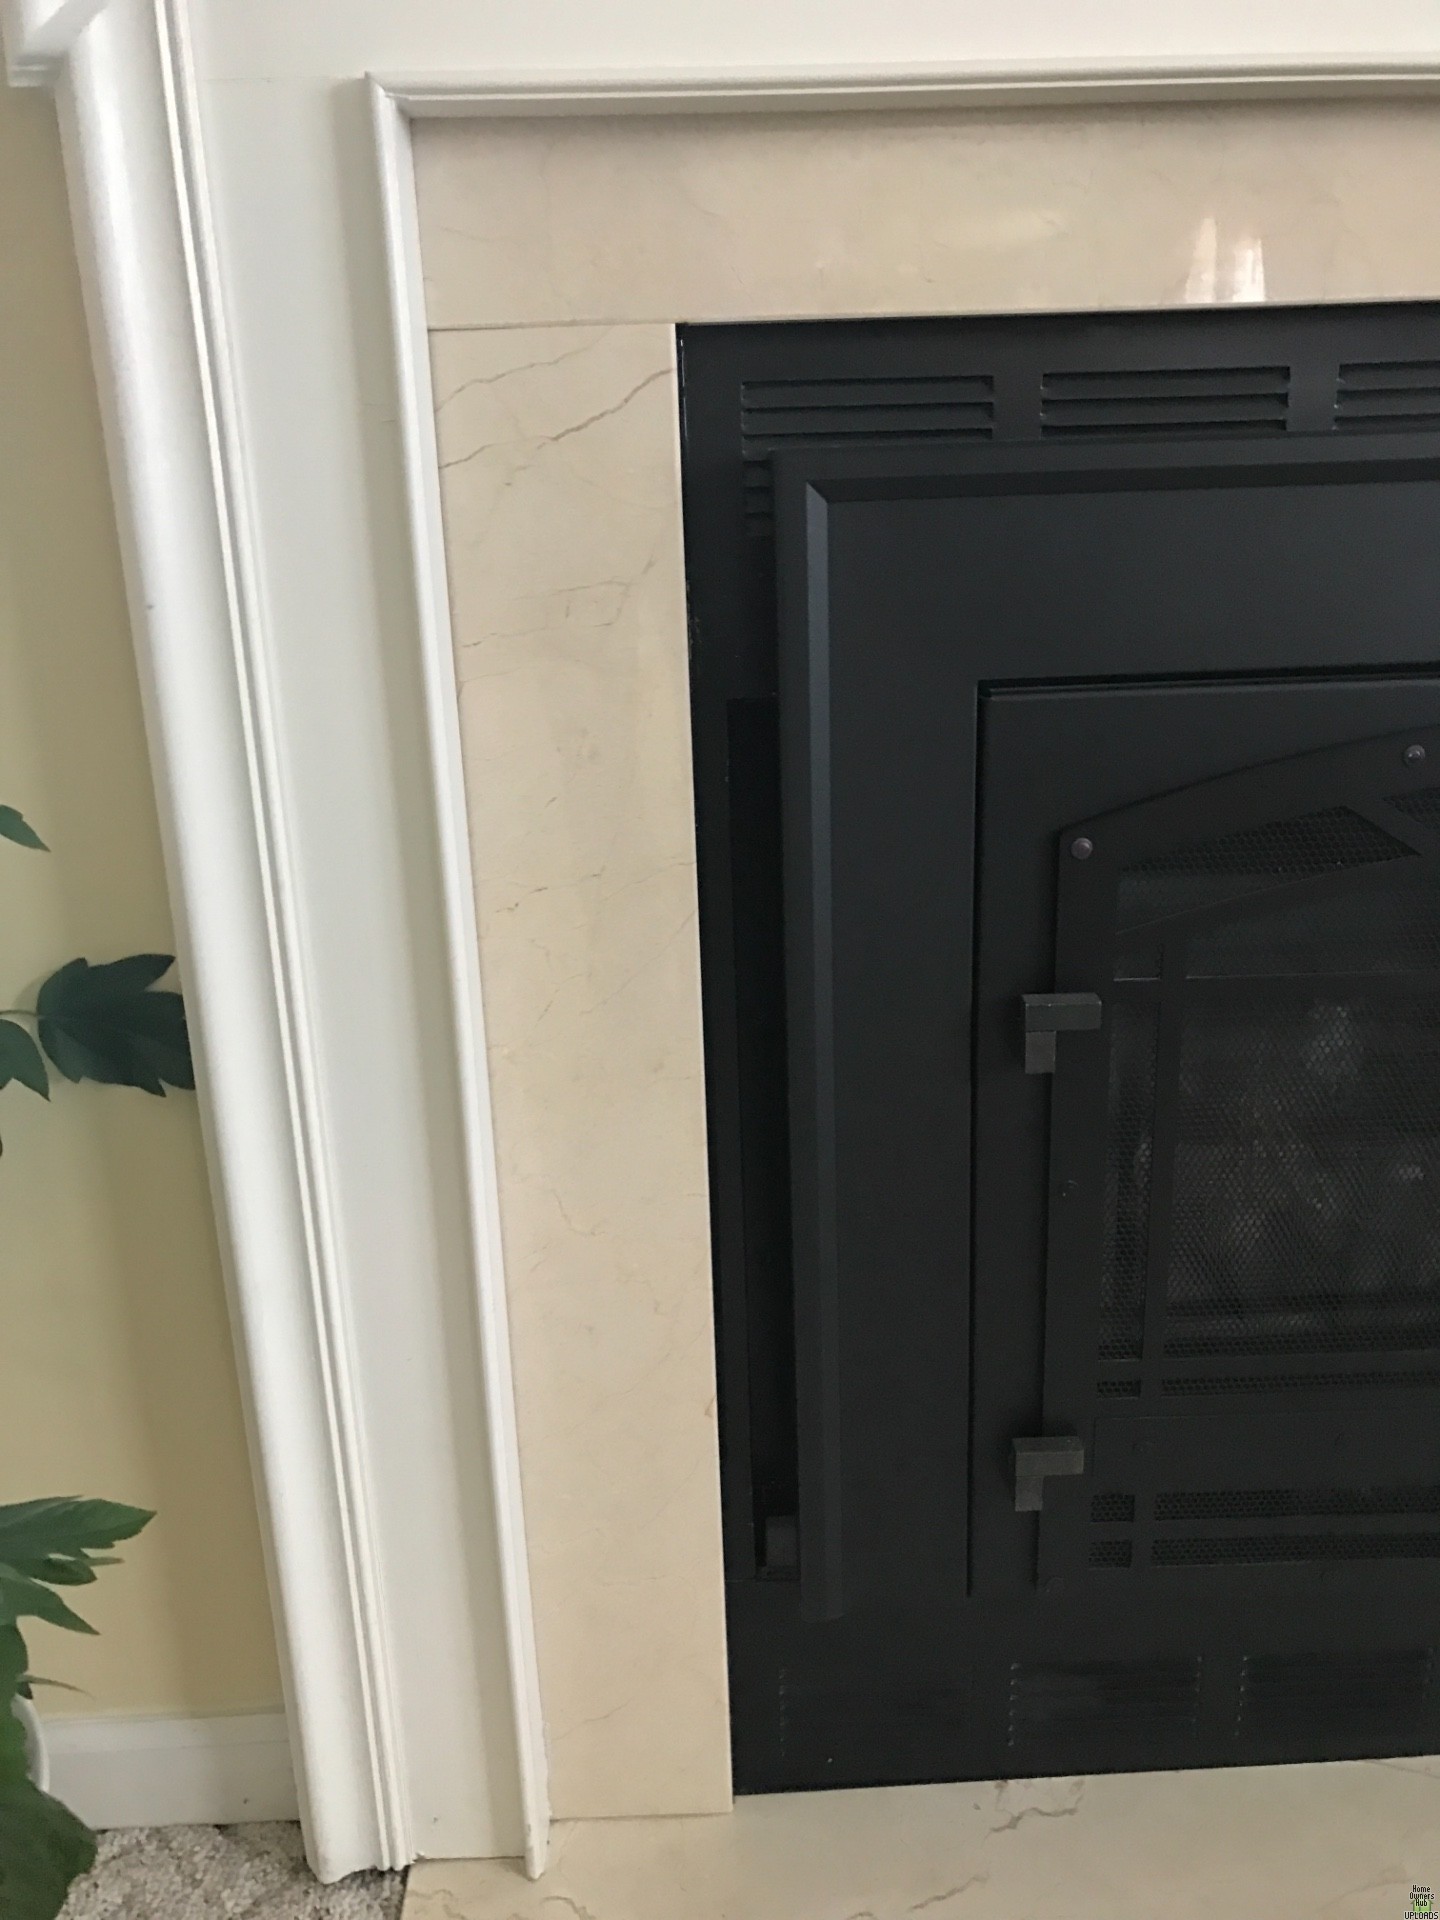 Image for New propane fireplace insert doesn't fit existing space